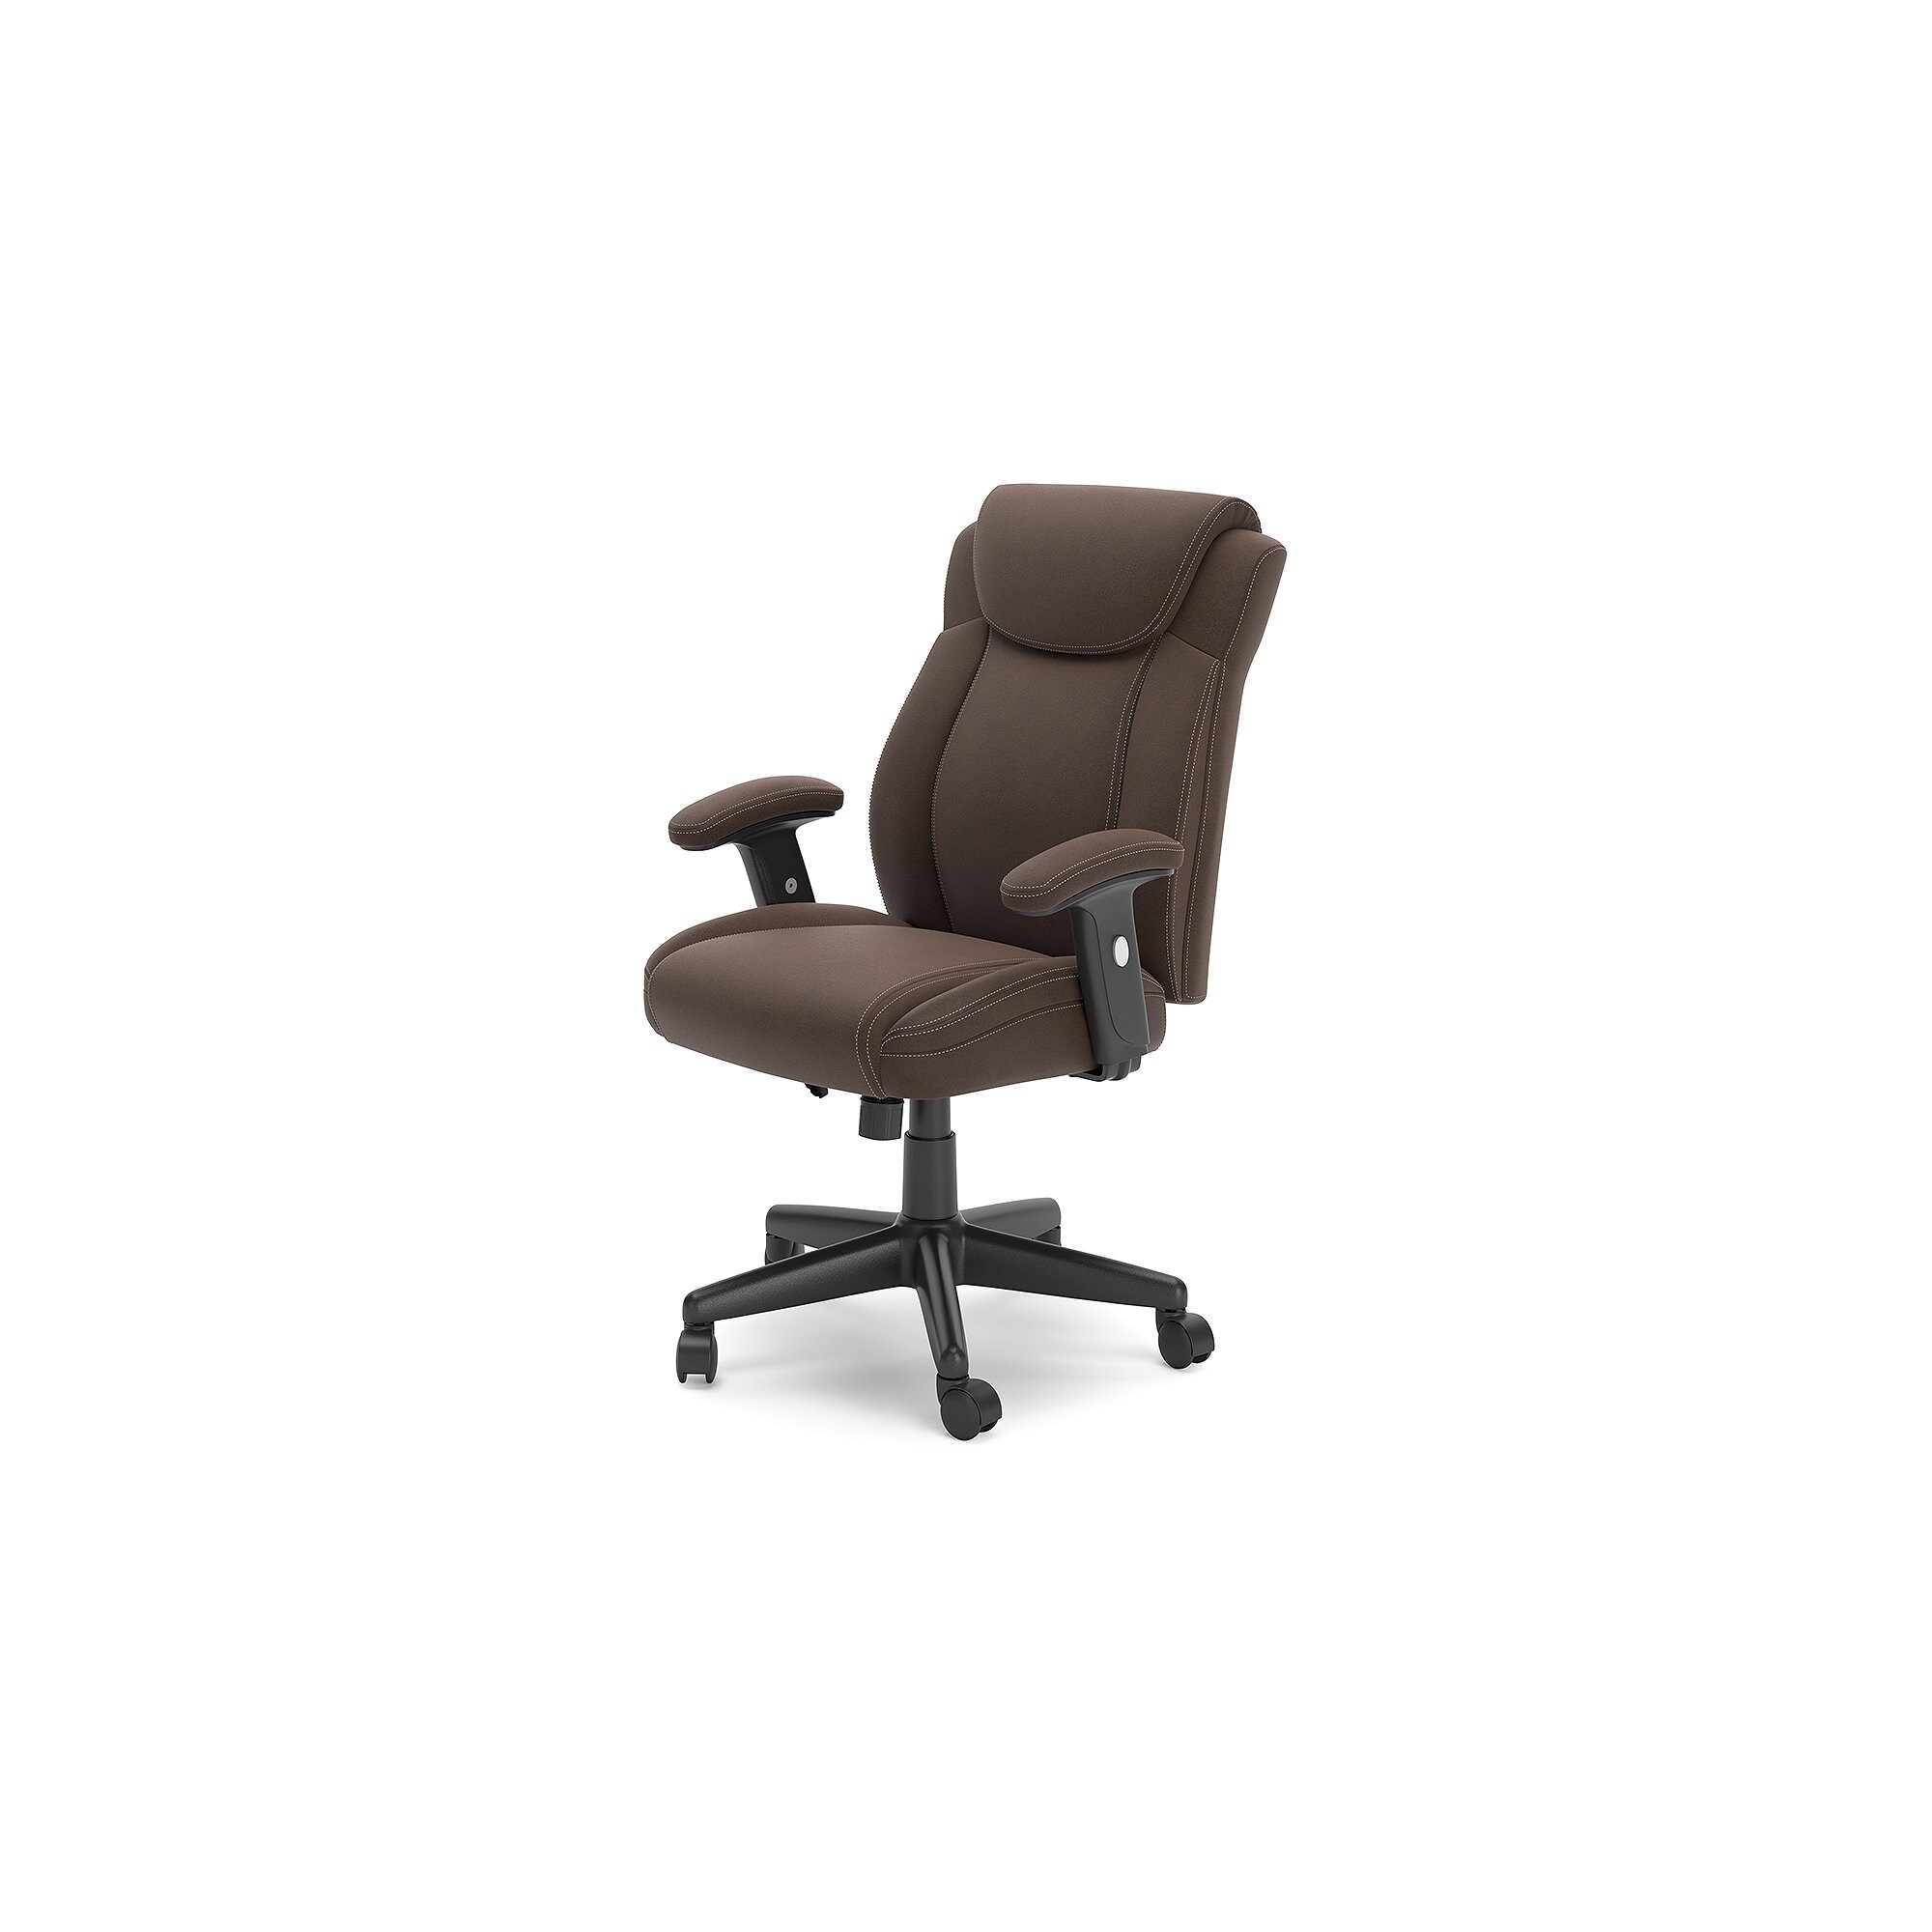 https://ak1.ostkcdn.com/images/products/is/images/direct/8f88c1a16ae7c1ff77c3c03ffd5f3d469f1d7d89/Ashley-Furniture-Corbindale-Brown-Black-Home-Office-Swivel-Desk-Chair.jpg